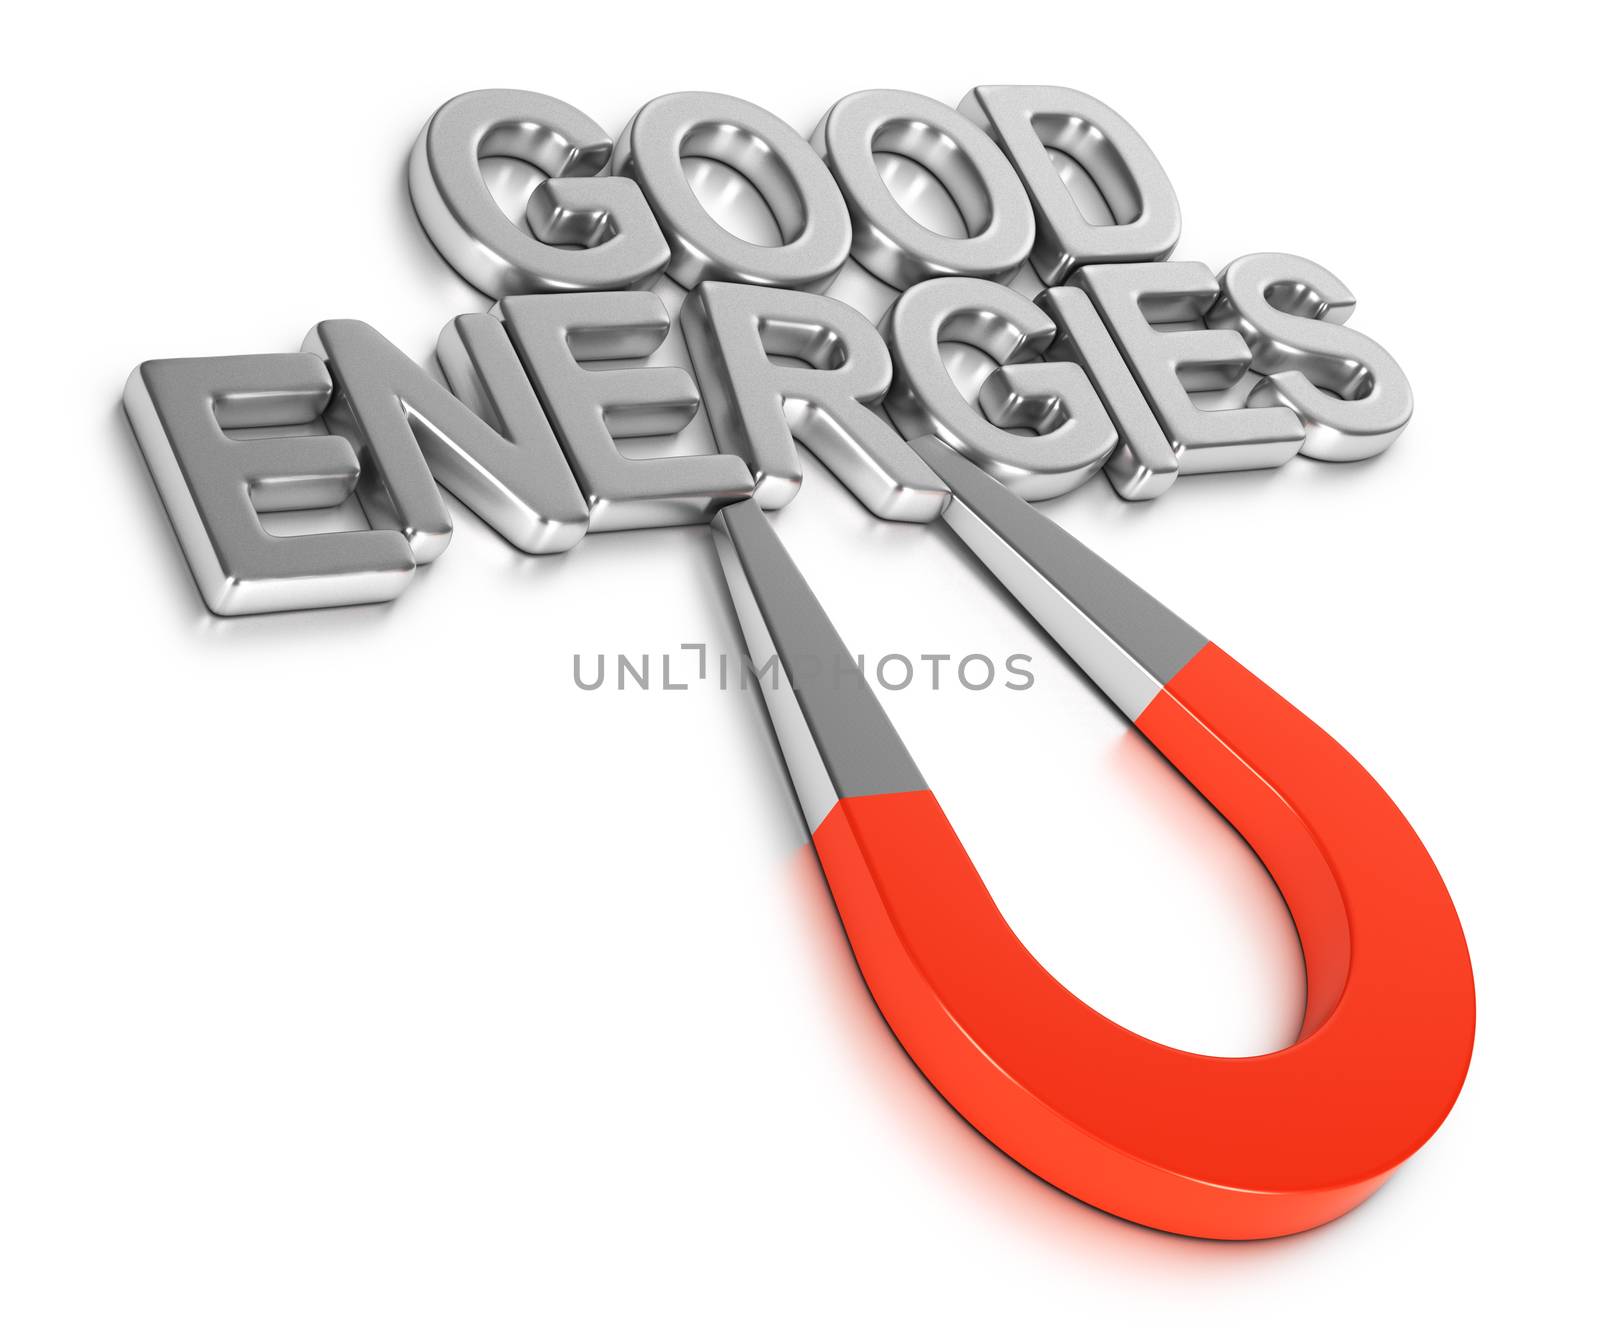 3d illustration of a magnet attracting phrase good energies over white background. Law of attraction concept.